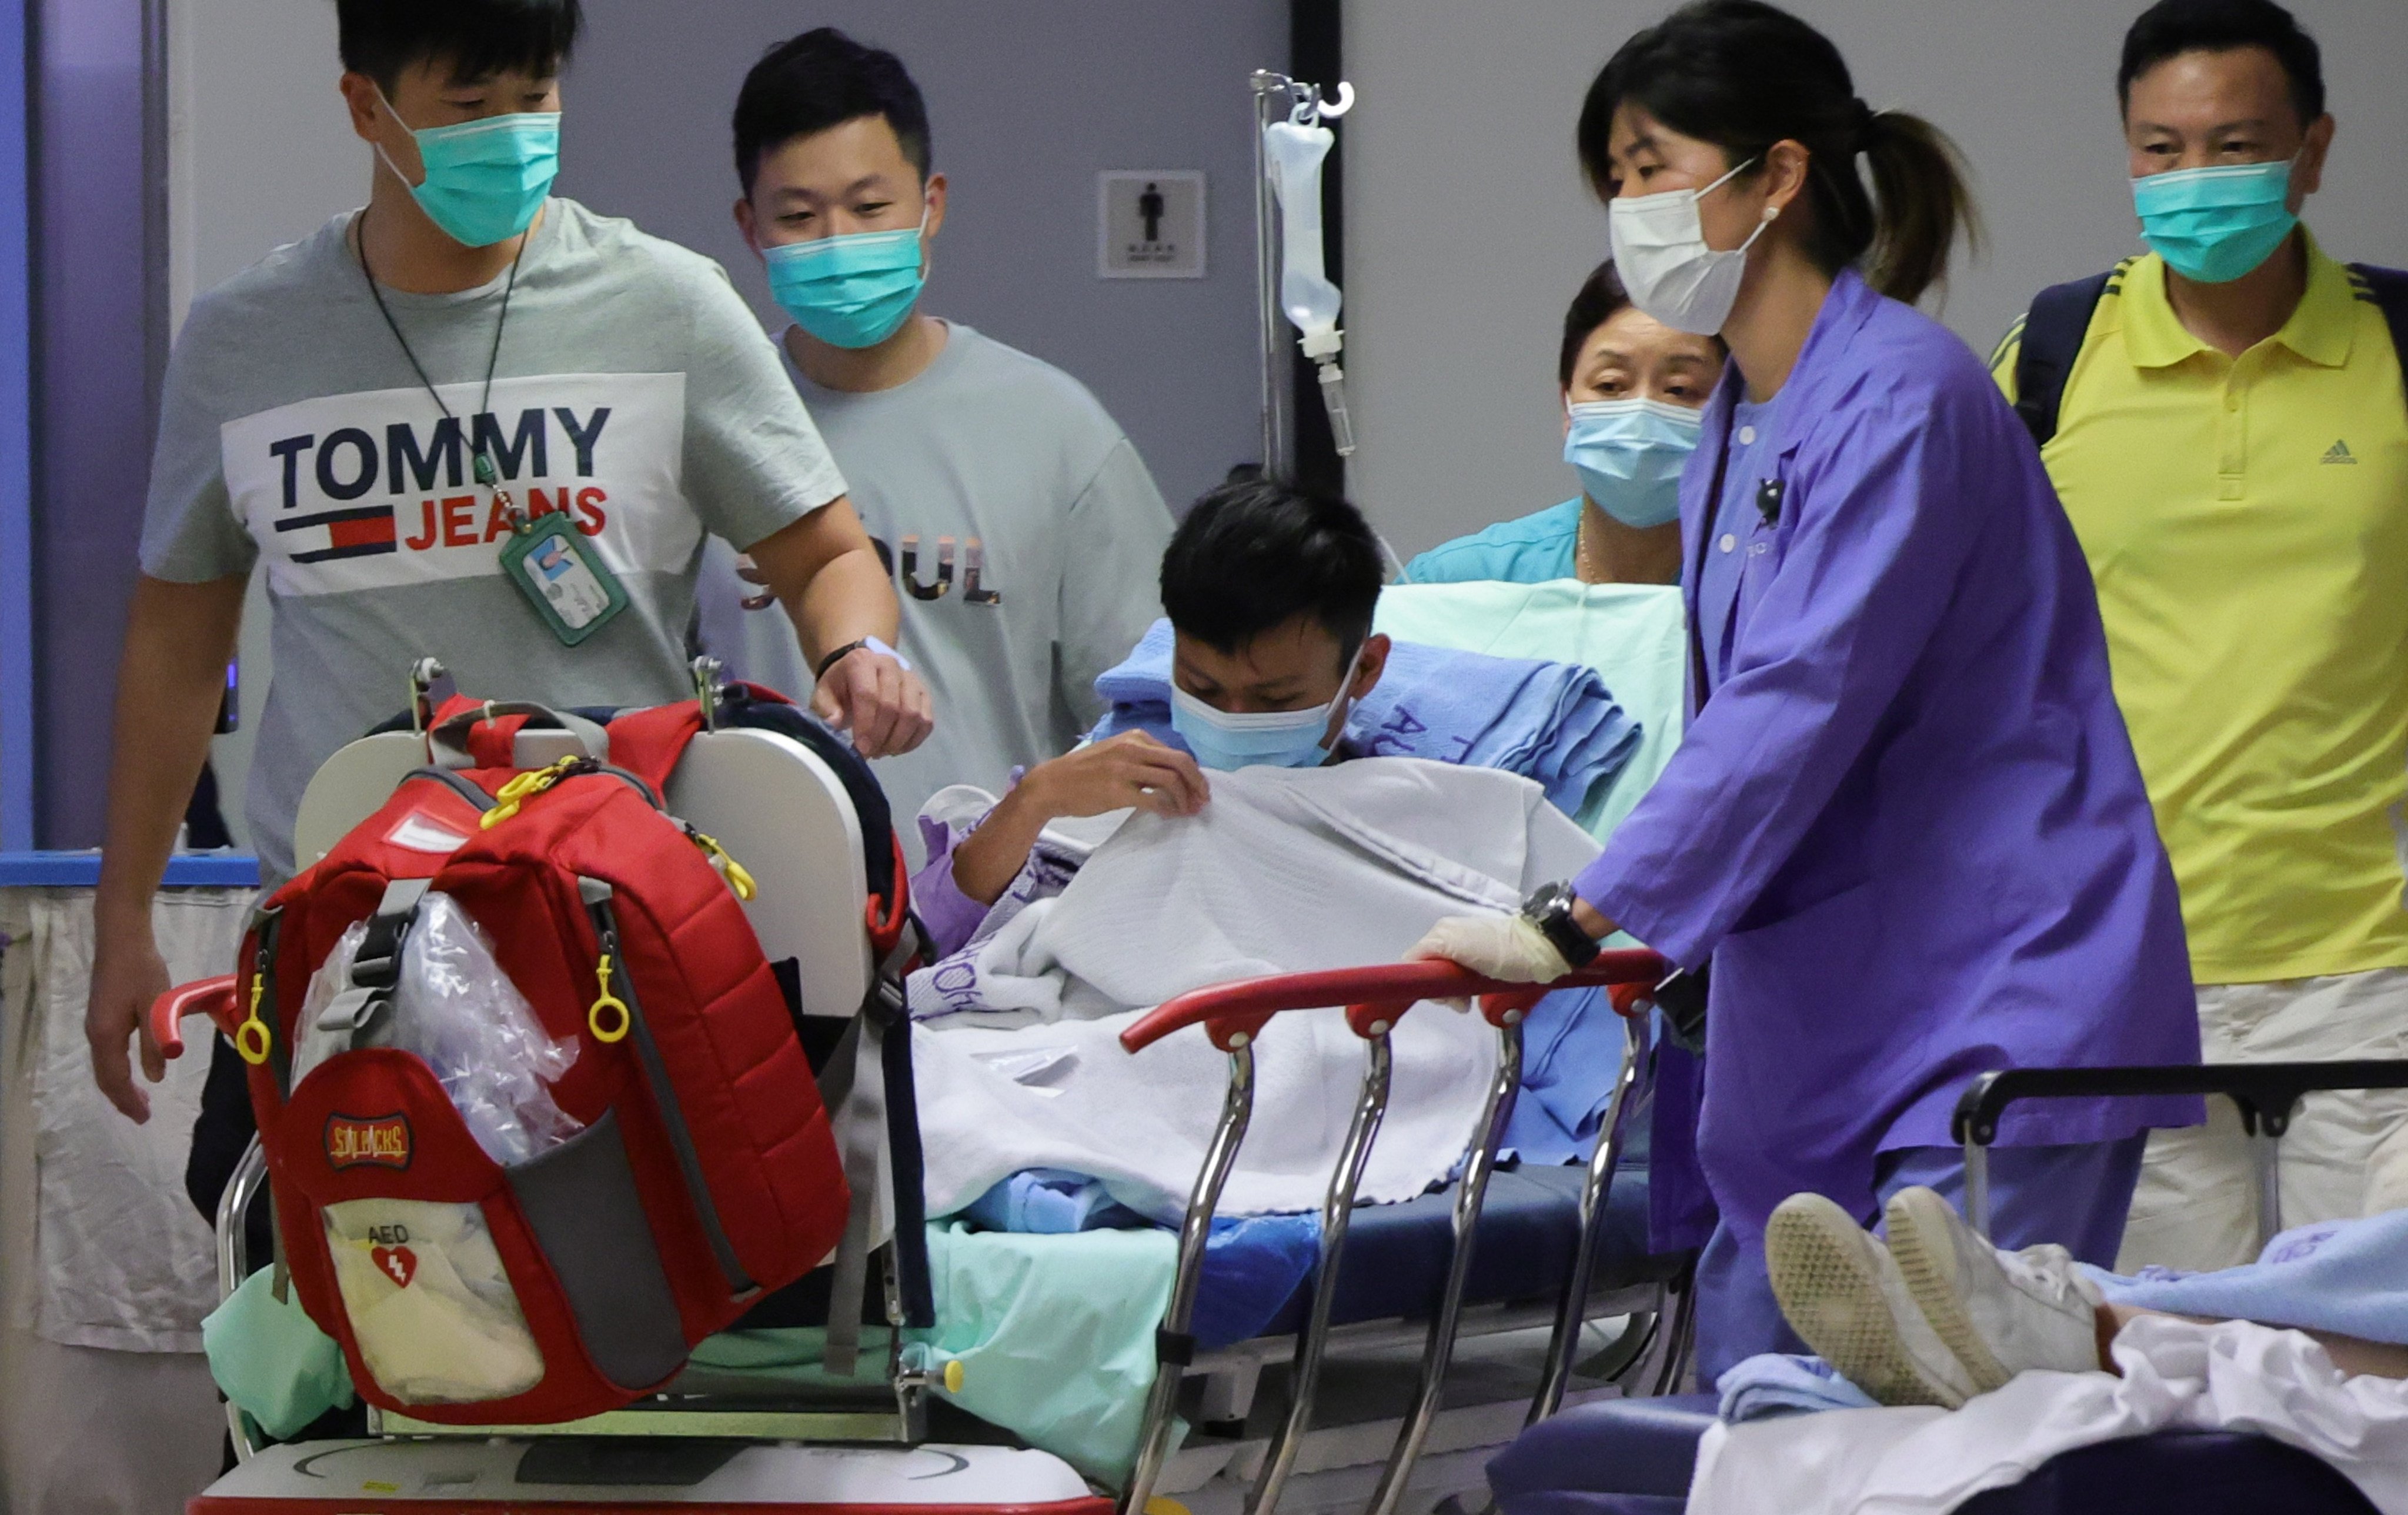 Matthew Tsang Hin-chit (centre), who was missing since October 4 and found near Lo Shue Tin in Ma On Shan Country Park, was airlifted to the Pamela Youde Nethersole Eastern Hospital for check-ups on October 11. Photo: May Tse